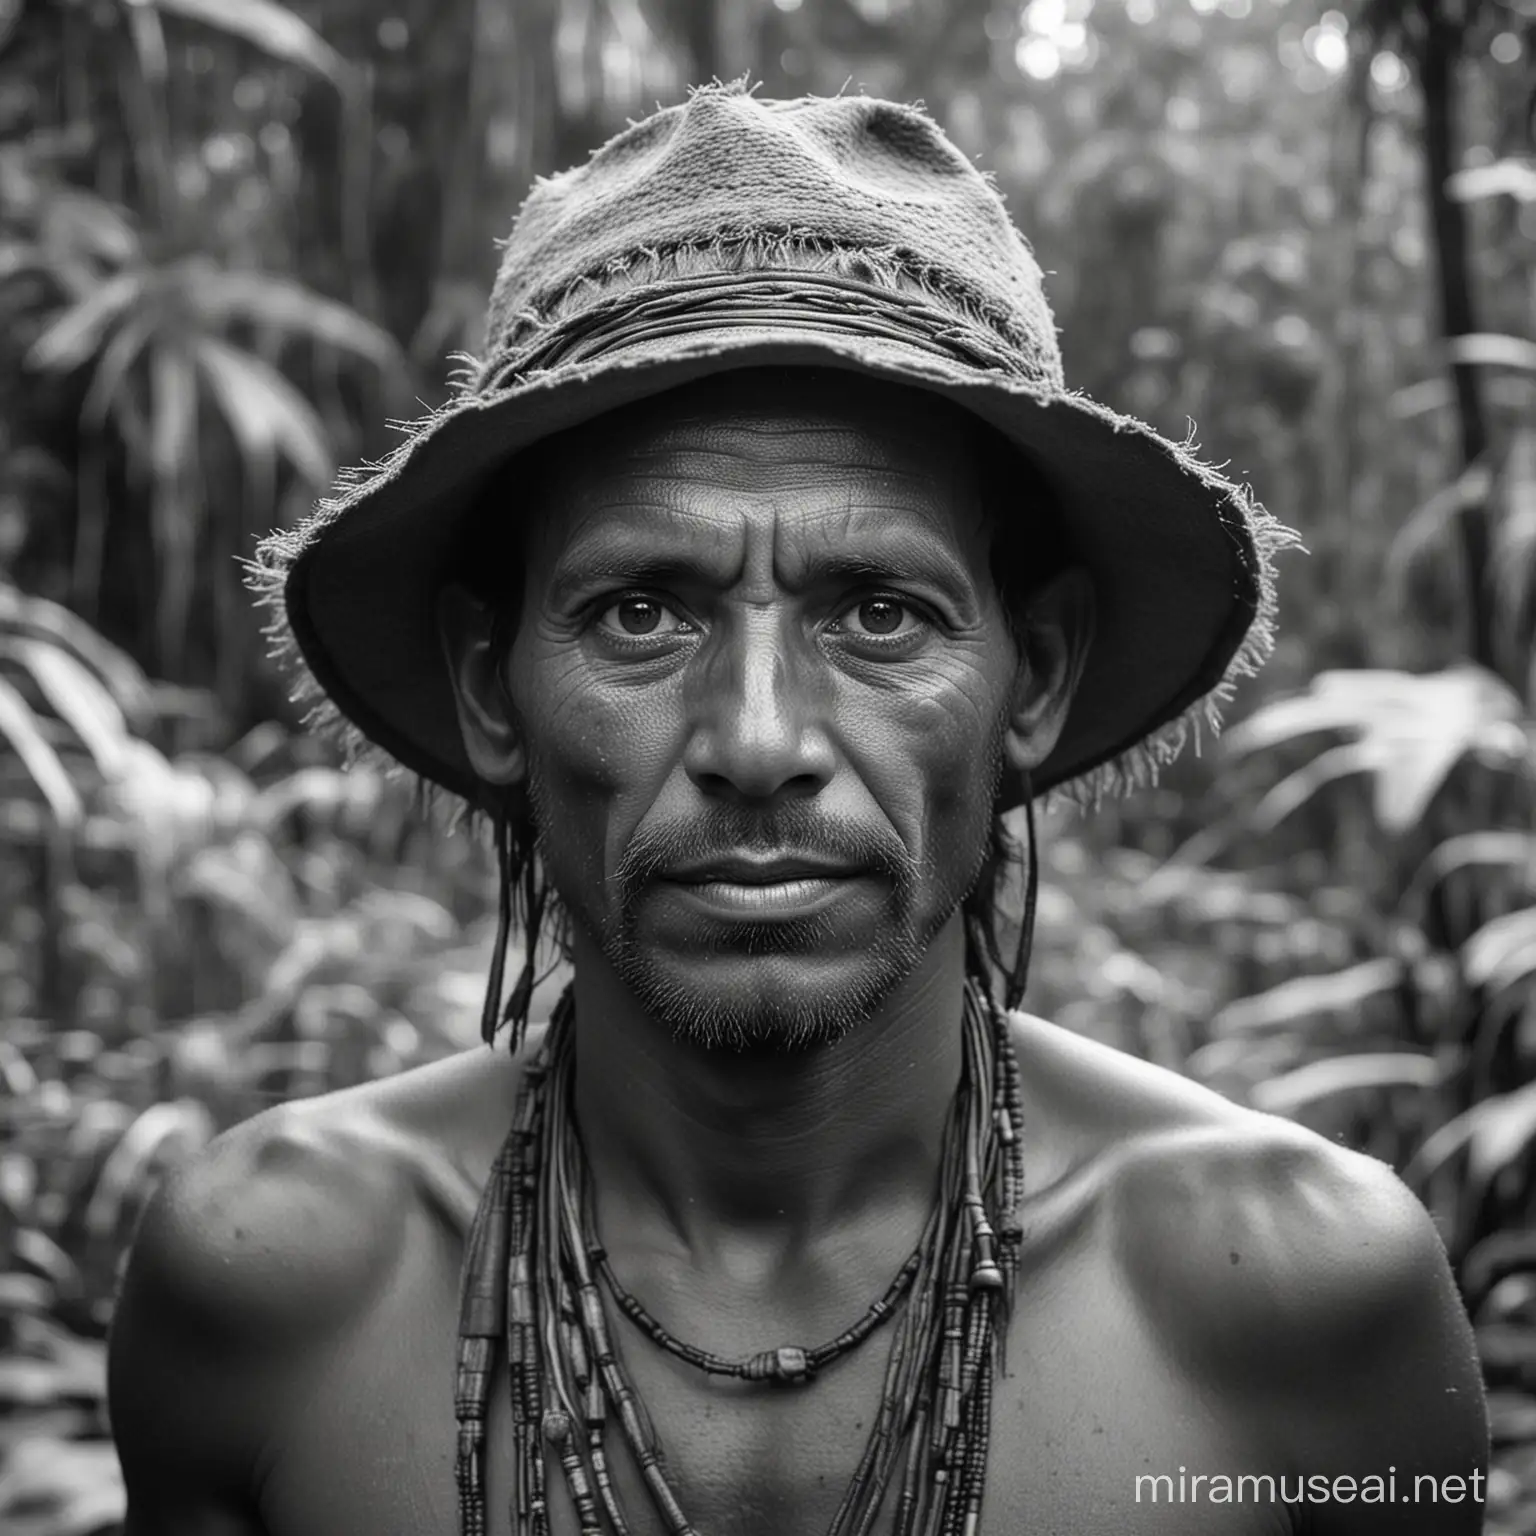 German Explorer Encountering Indigenous Tribe in Amazon Jungle Captured in Vintage Black and White Photography with Zeiss Lens